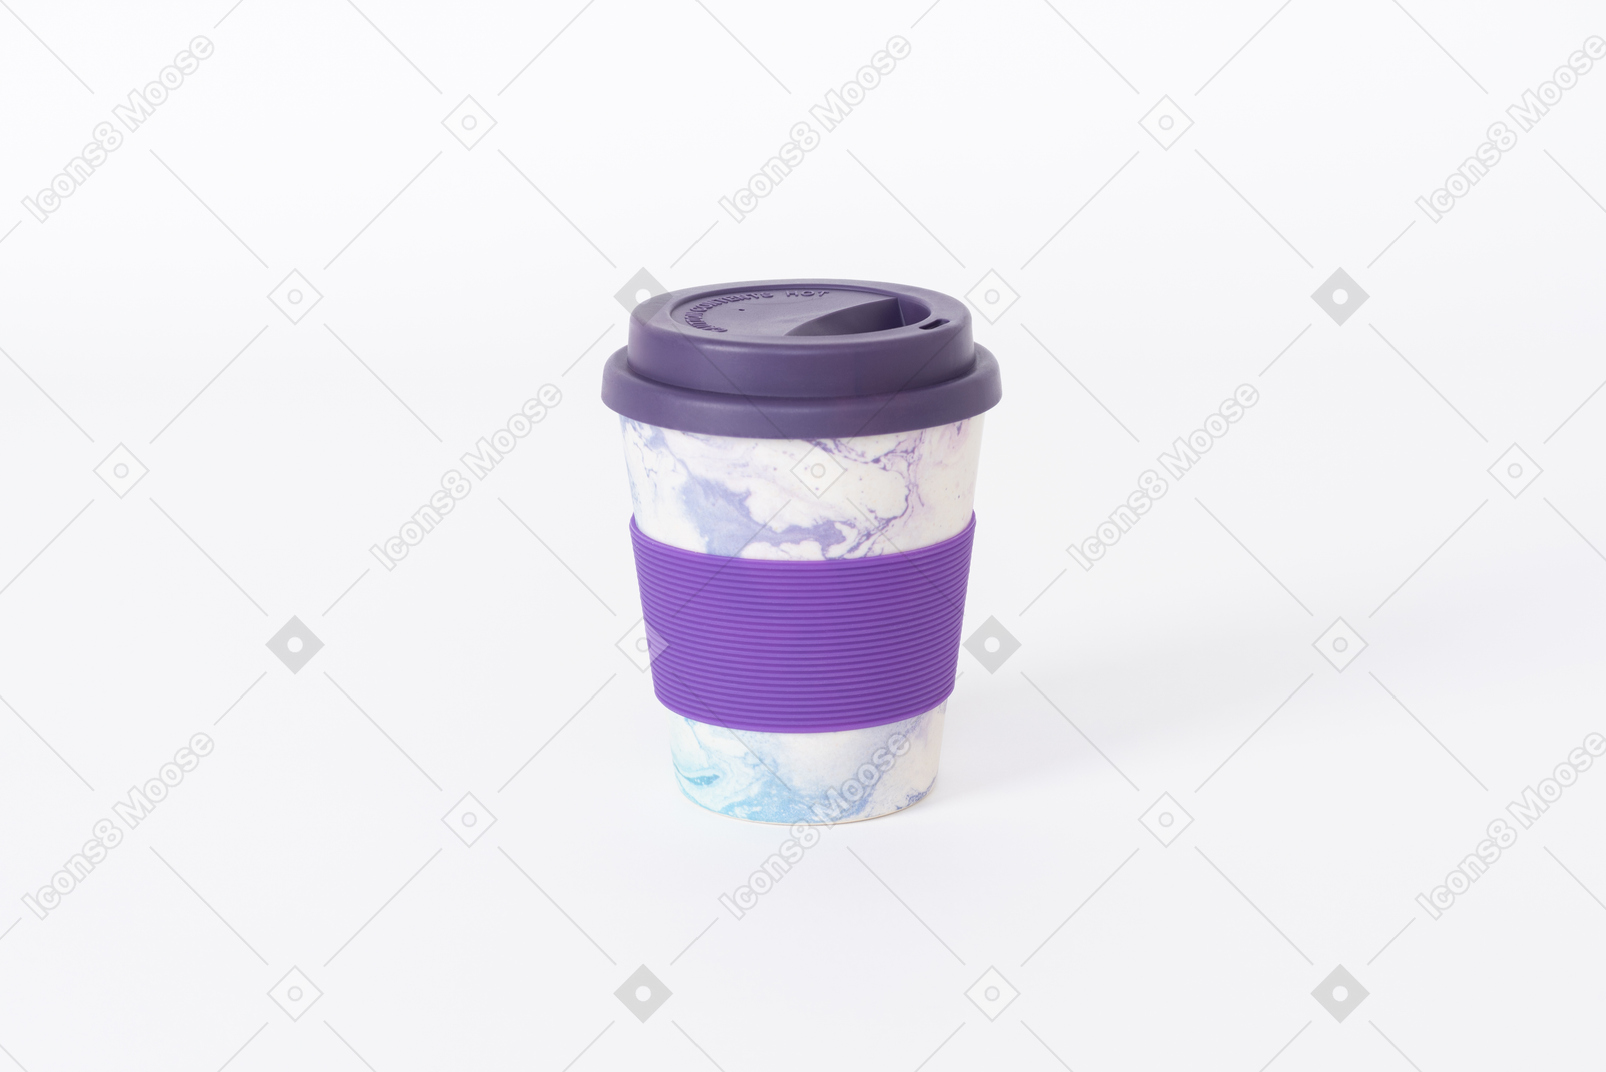 Bringing coffee with me in reusable cup